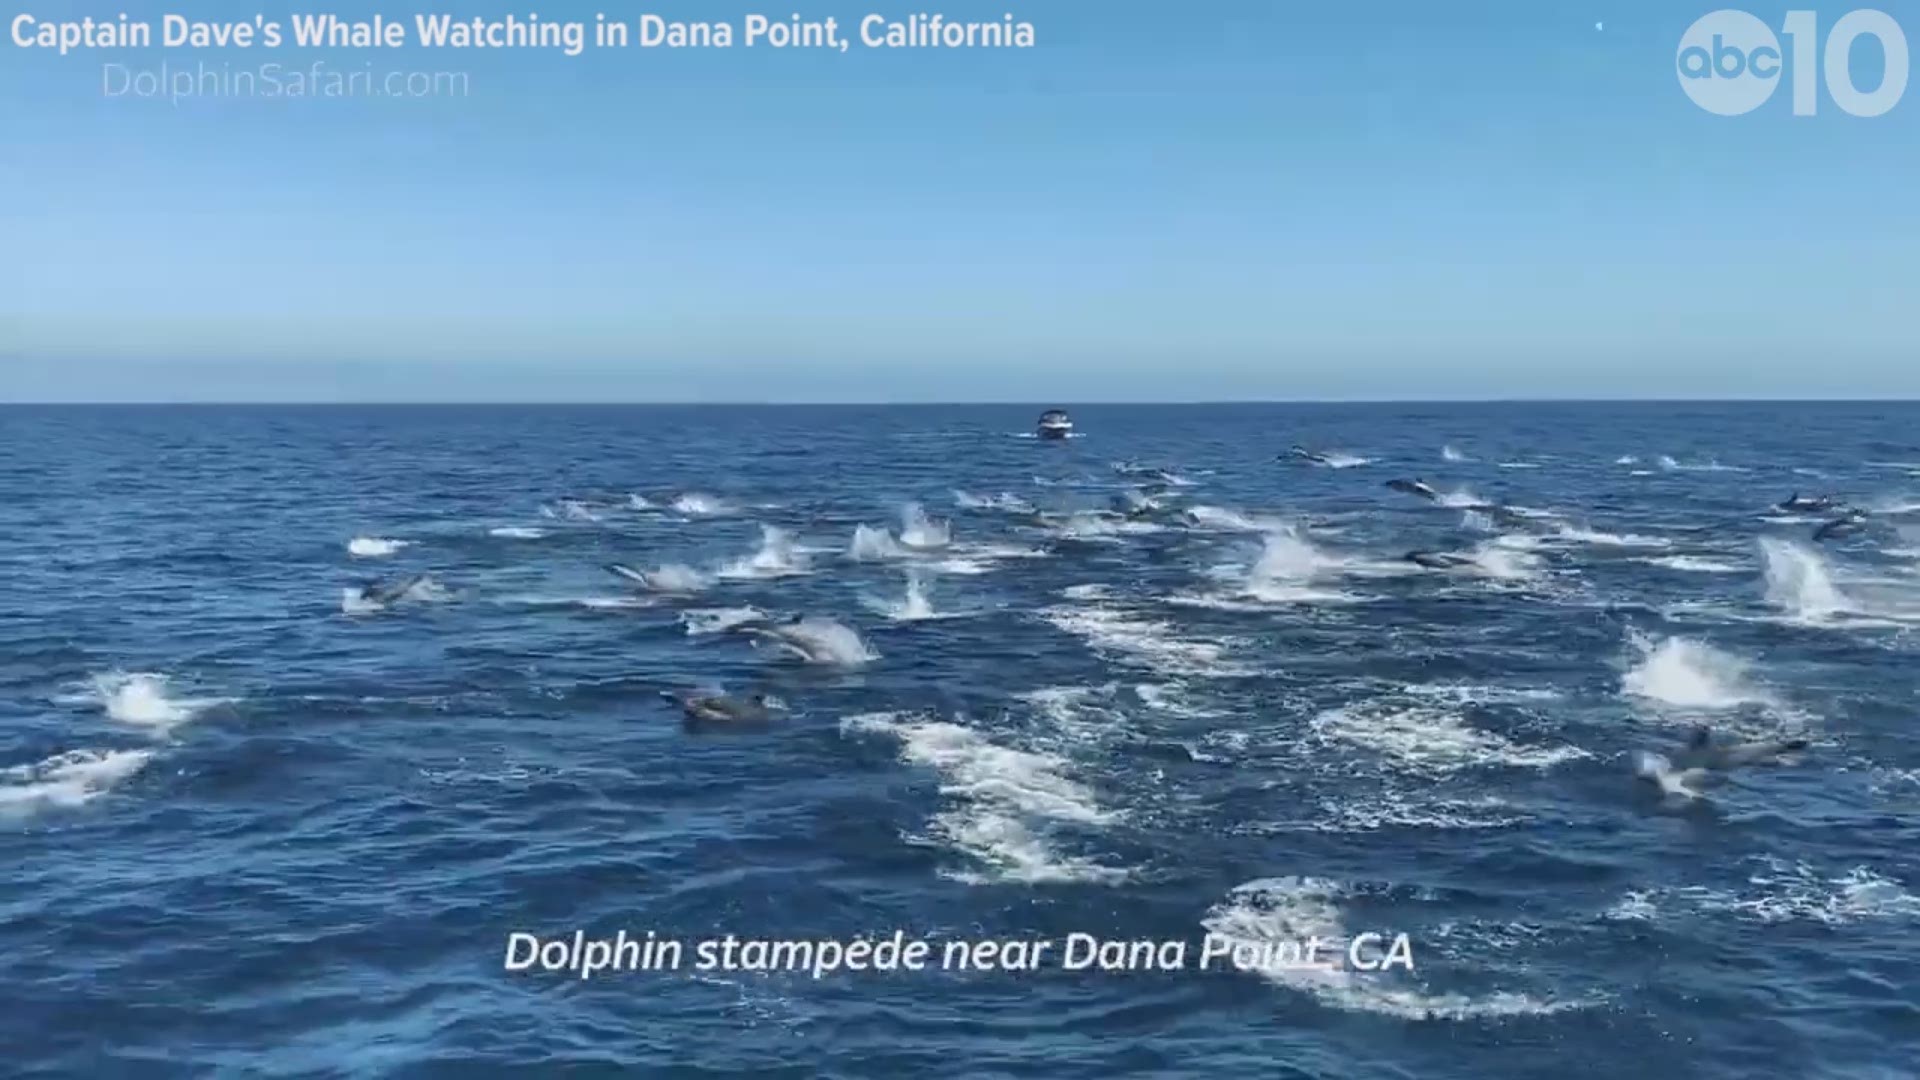 Approximately 300 dolphins were caught on camera Sunday stampeding across the ocean near Dana Point.